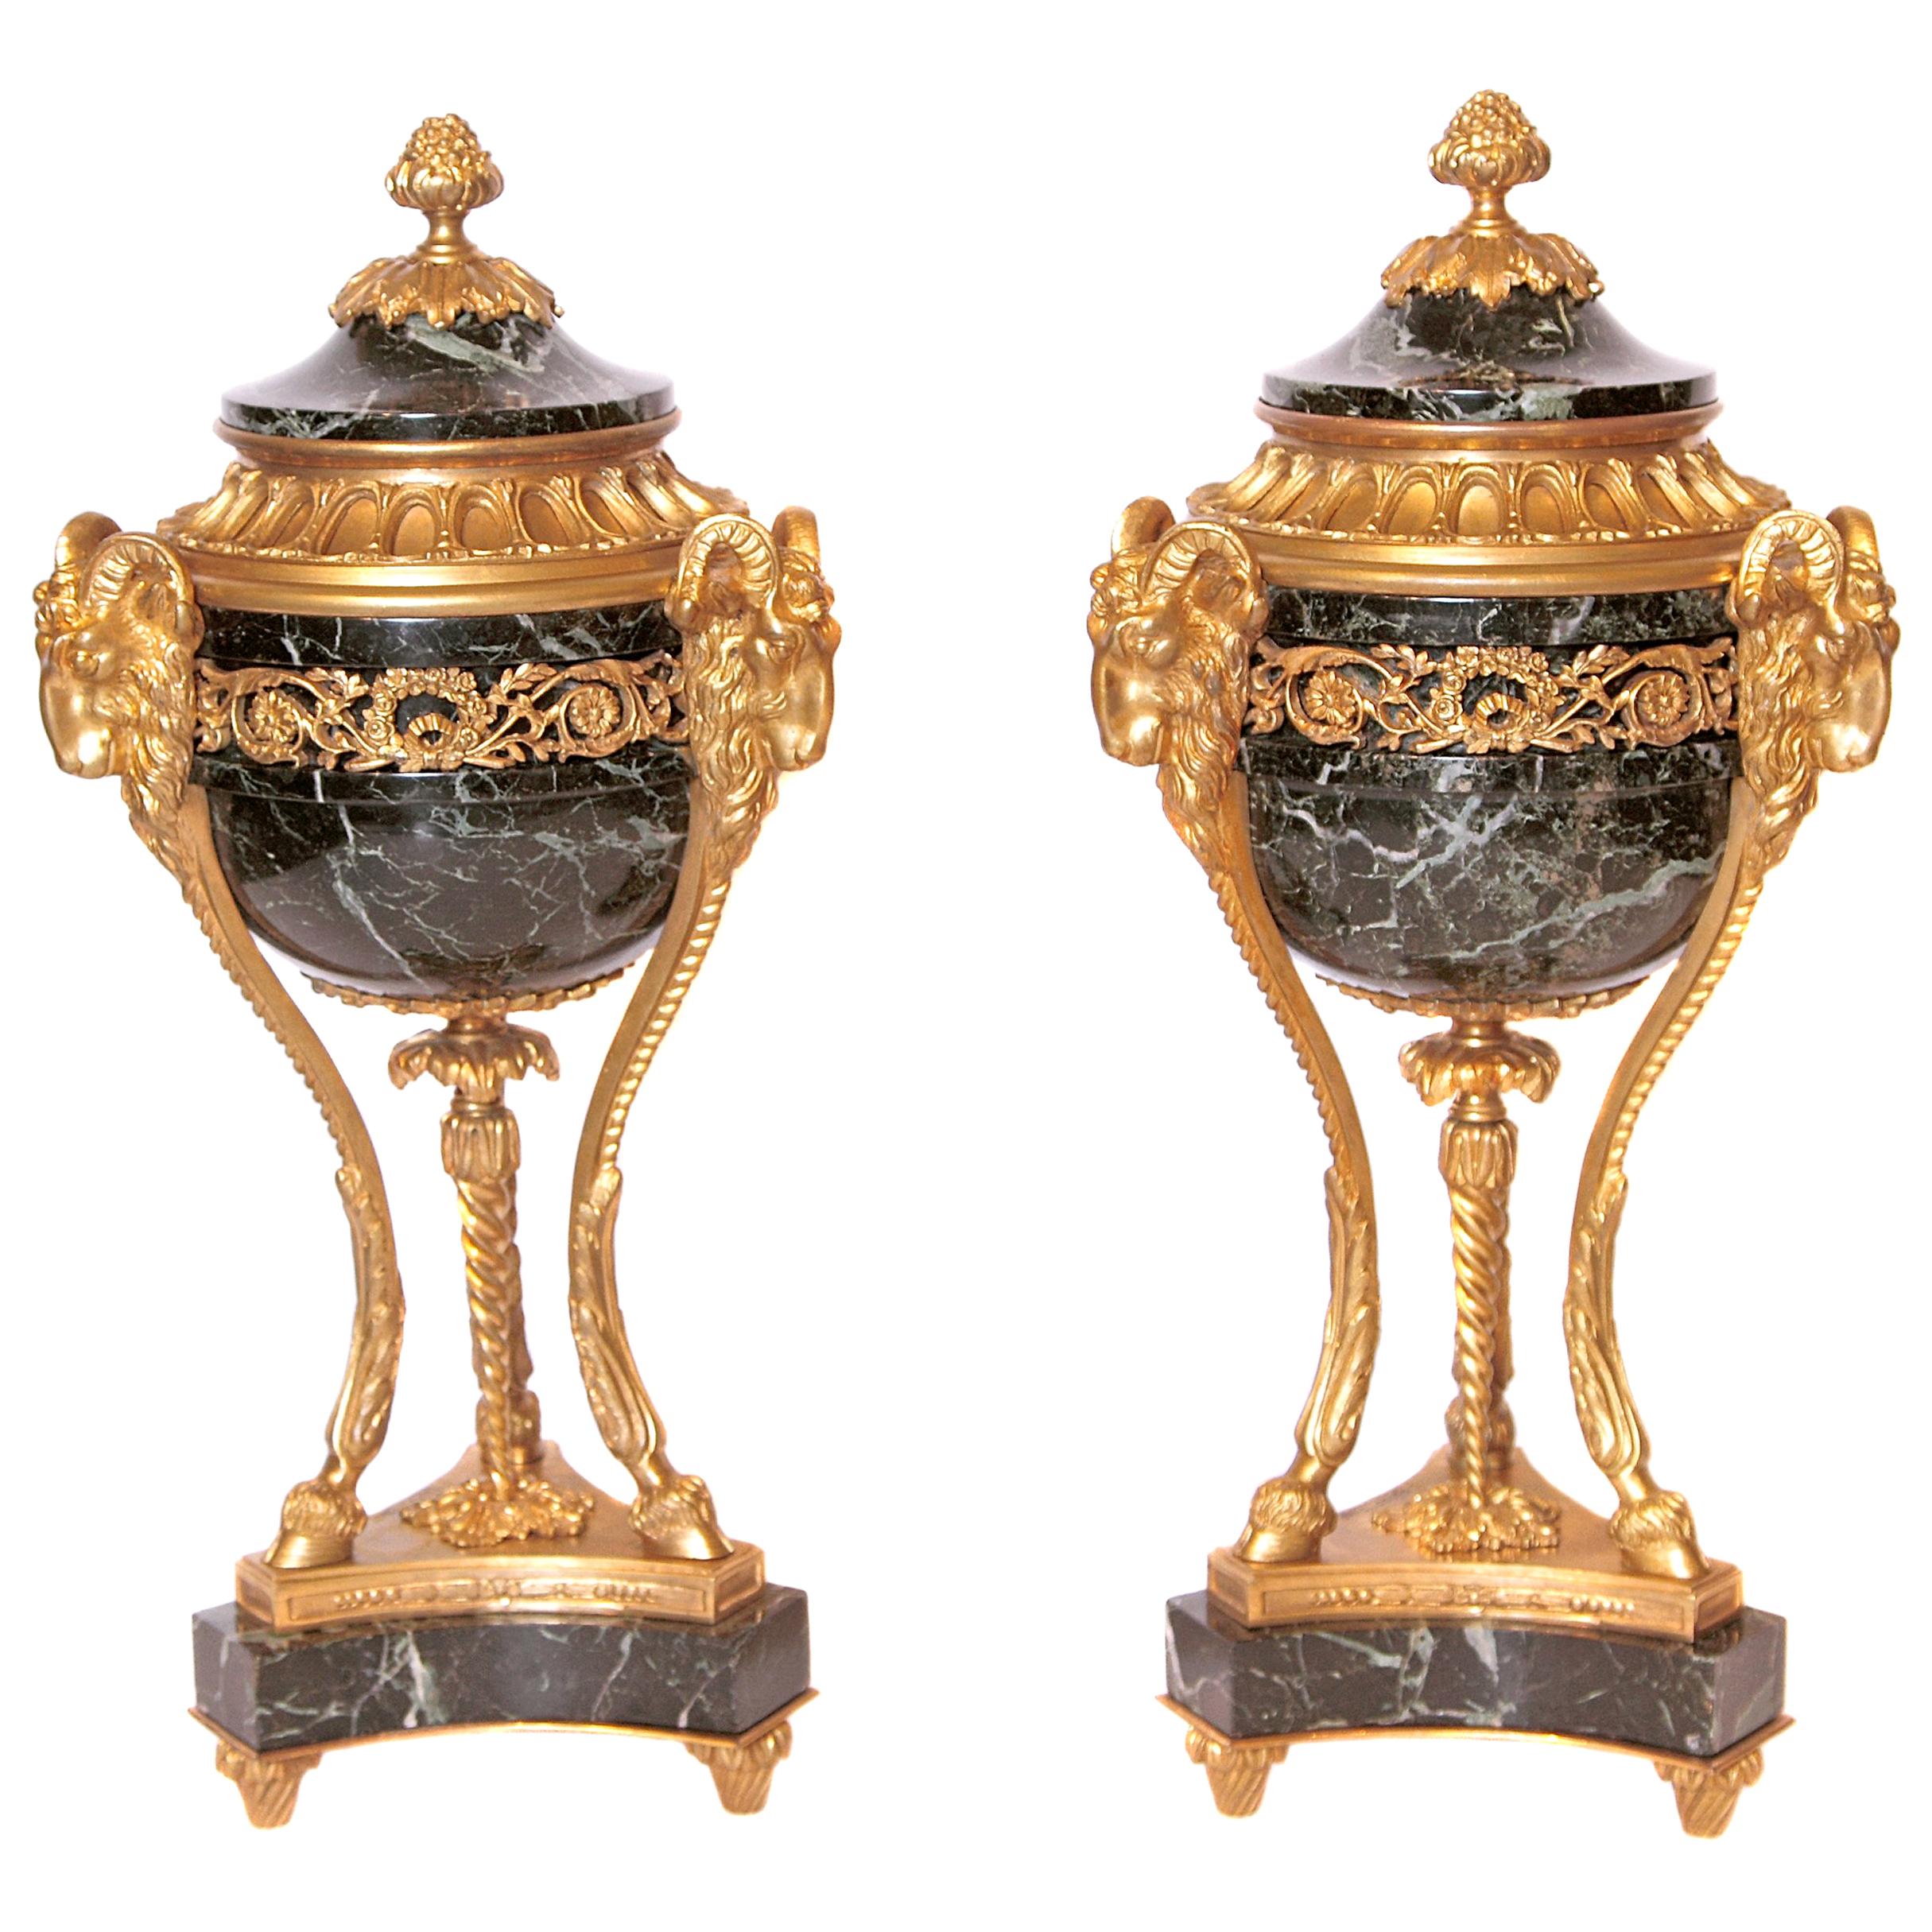 Pair of 19th Century French Louis XVI Marble and Gilt Bronze Urns